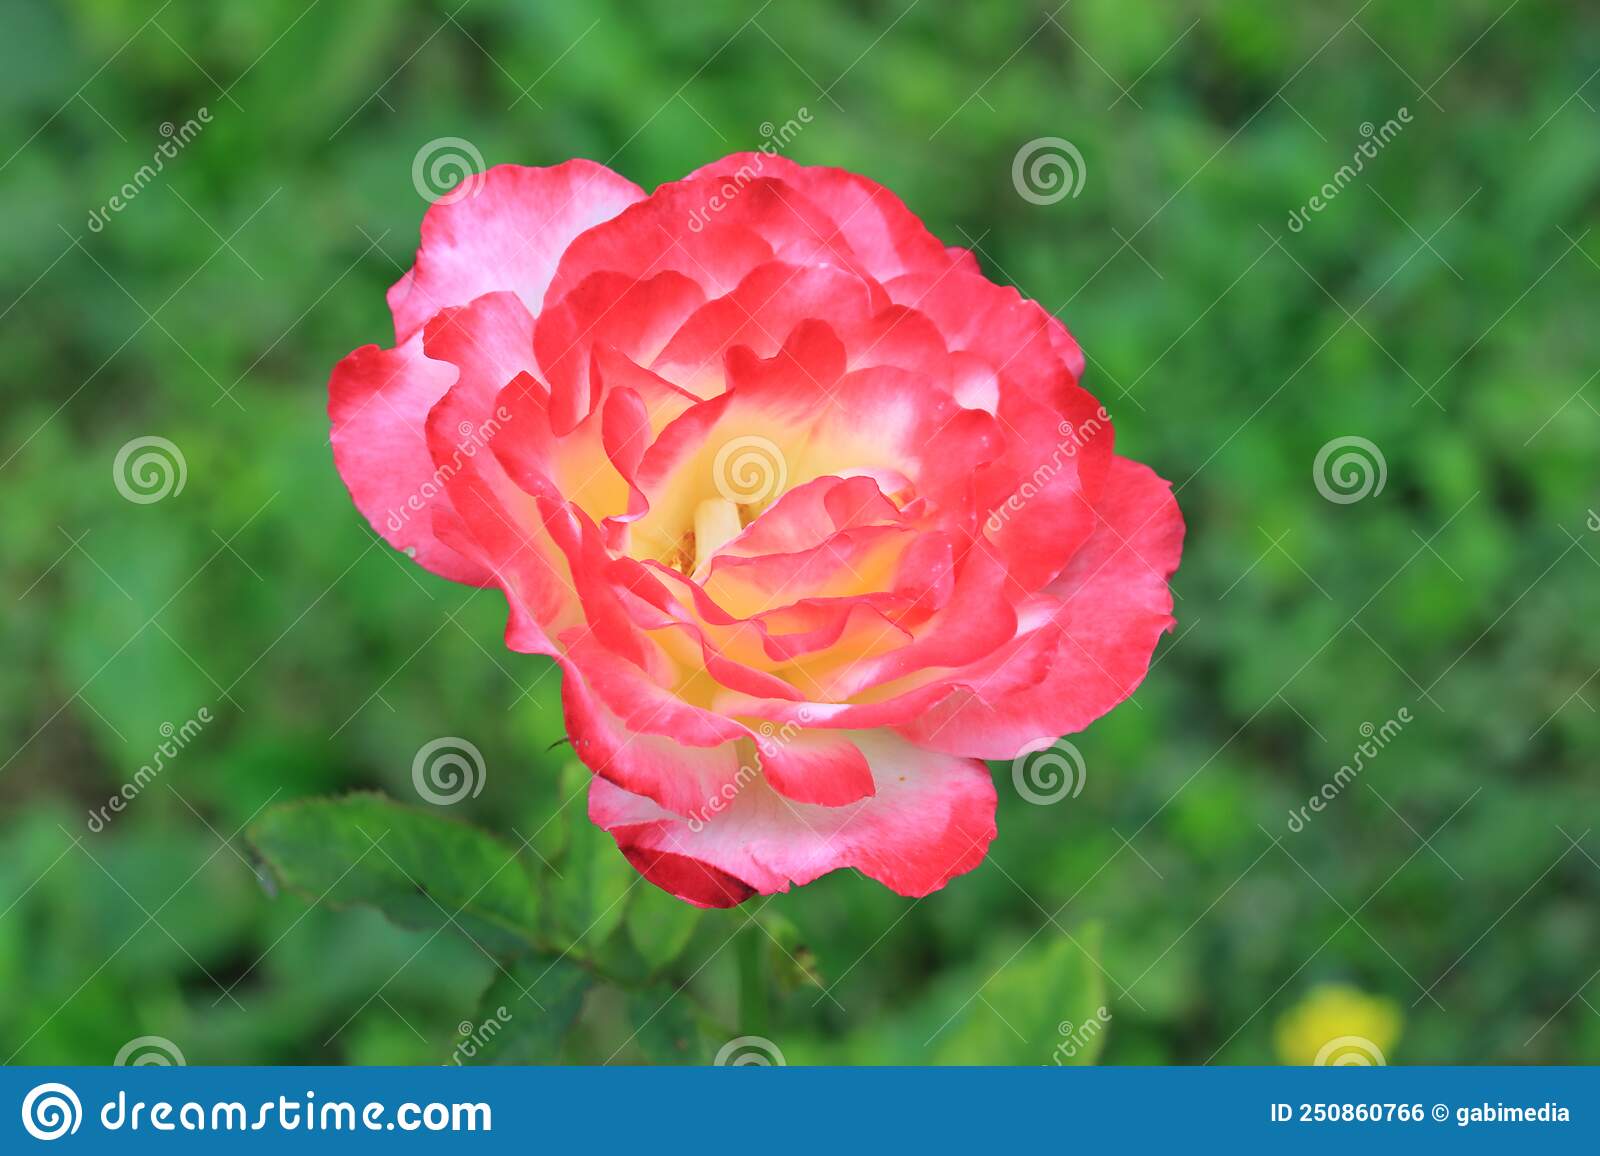 Top view of a red rose on a blurred background 